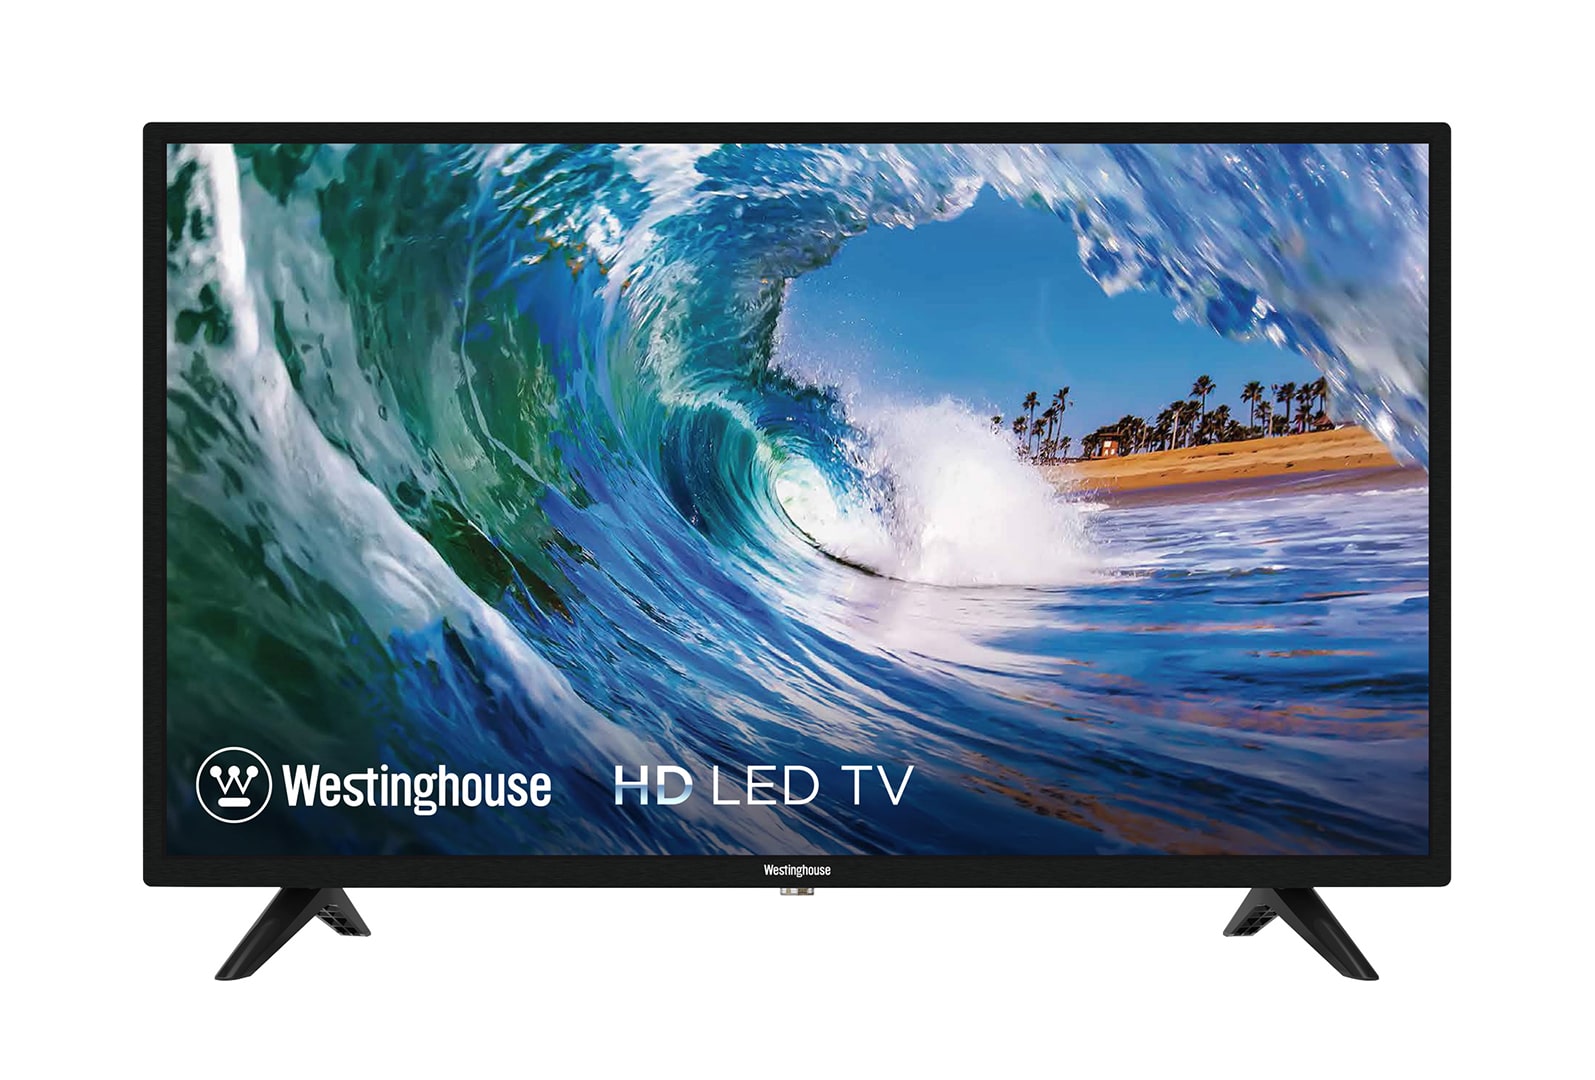 Westinghouse 32" HD LED 720p TV with 2-Year Coverage $49.99